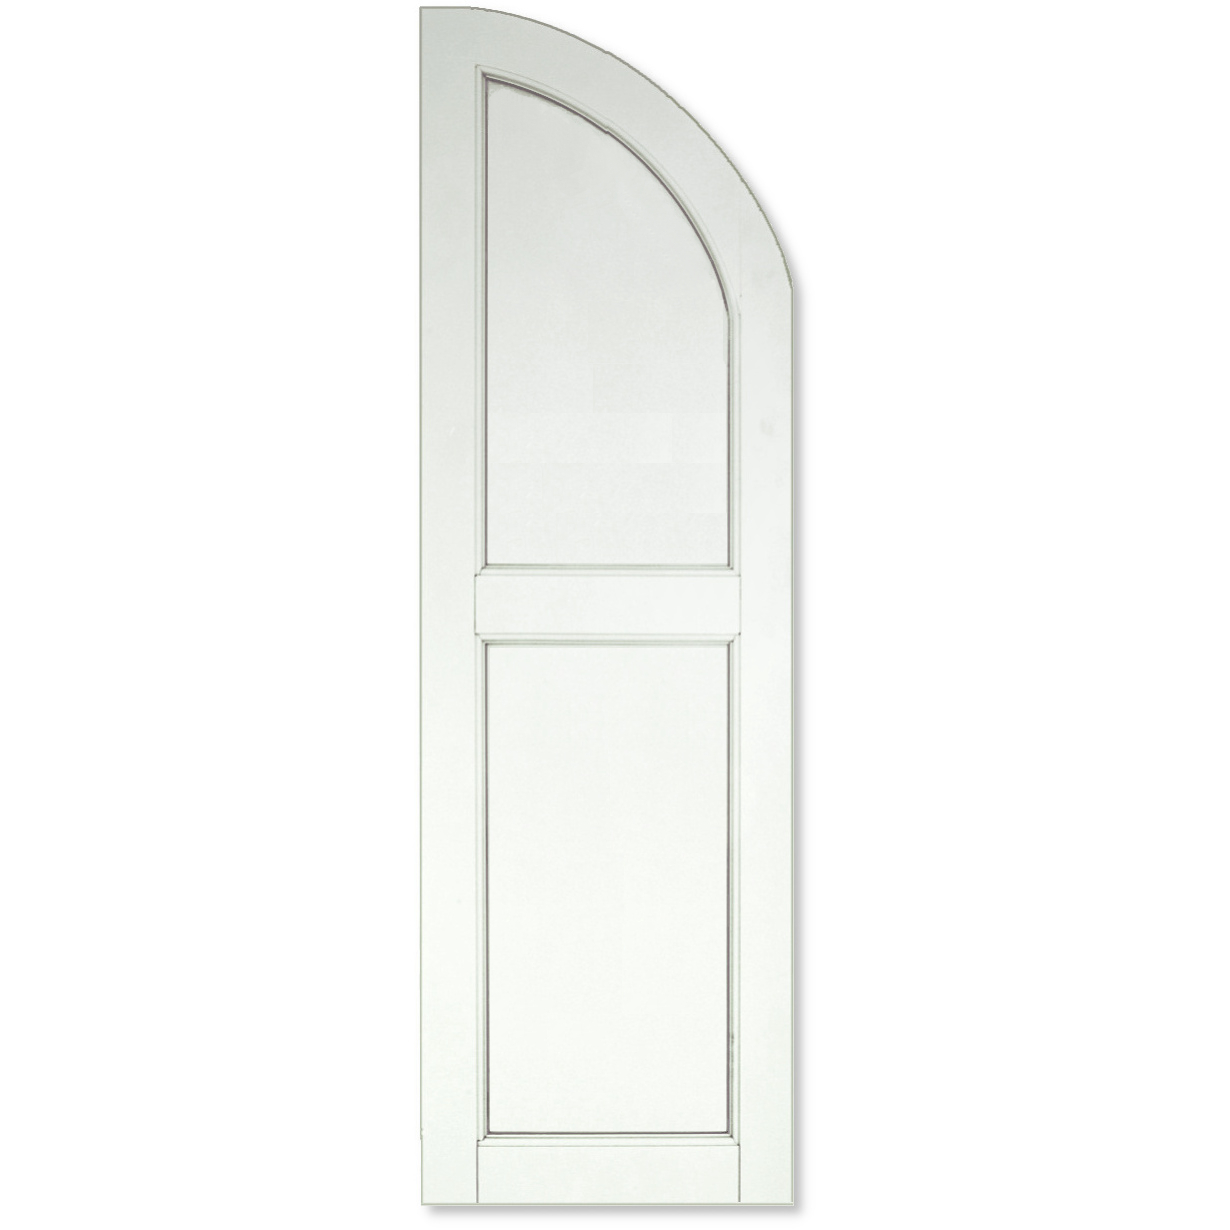 Atlantic ProSeries Flat Panel Shutter With Arch Top - 1 Pair